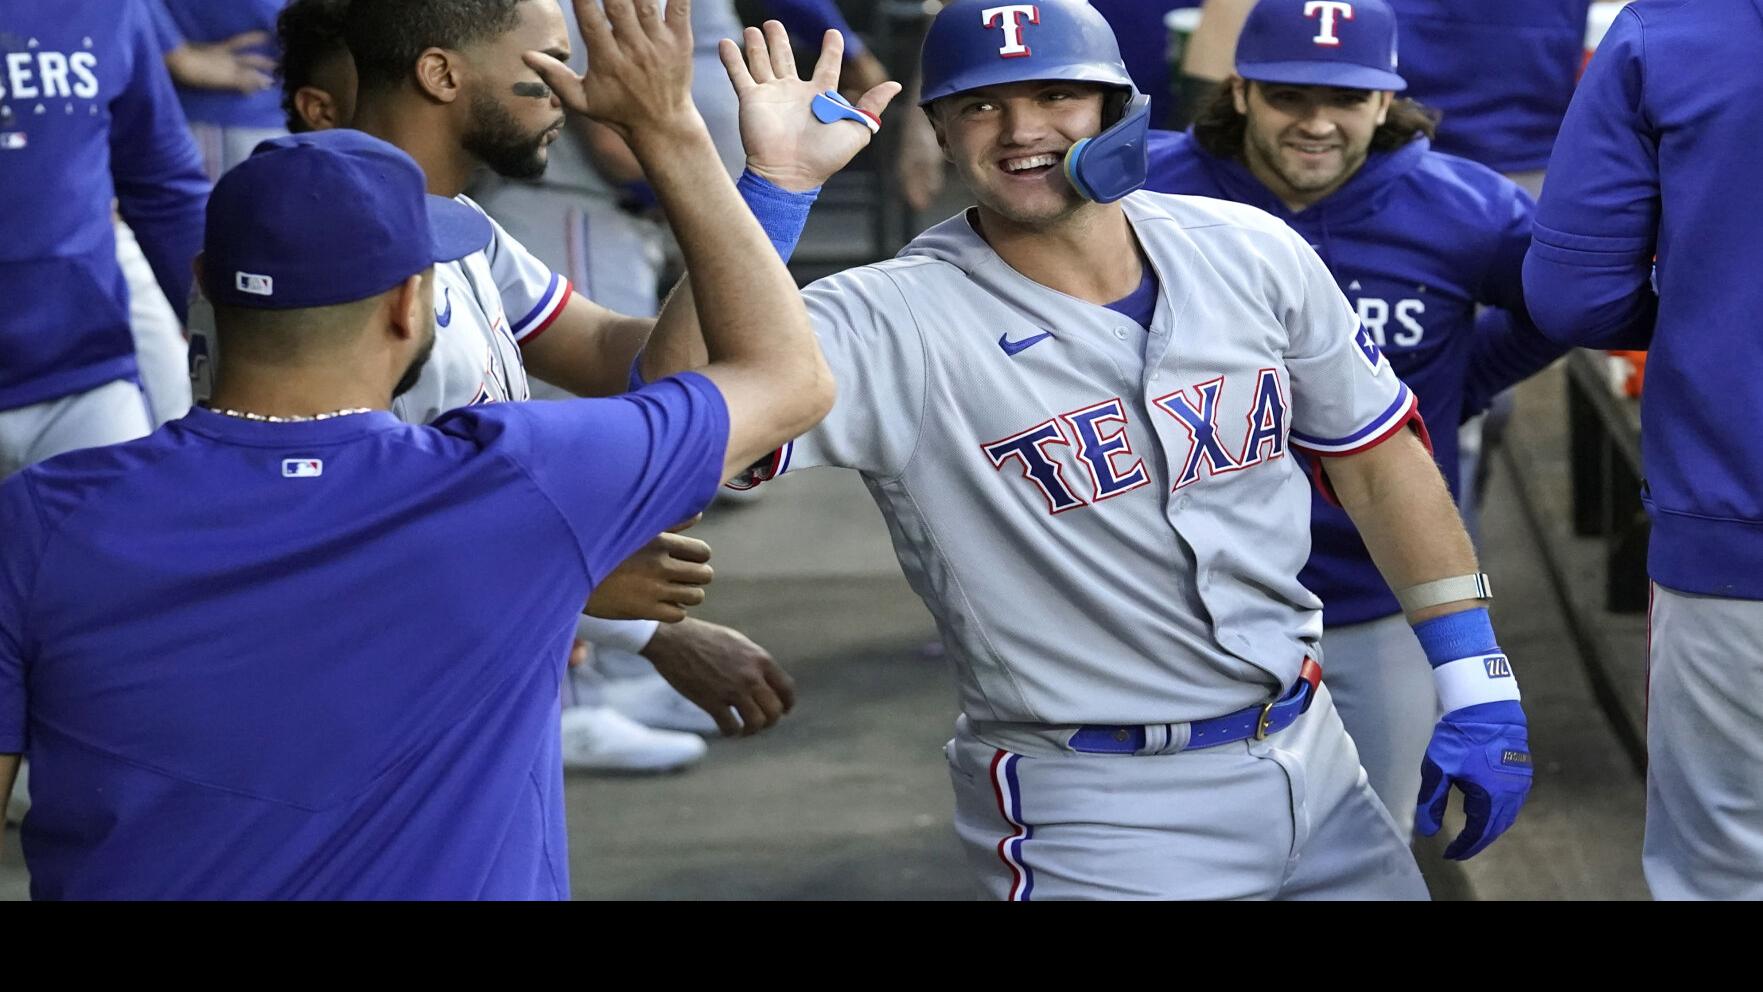 Jung hits 15th homer, Rangers hang on to beat White Sox 5-2 - The